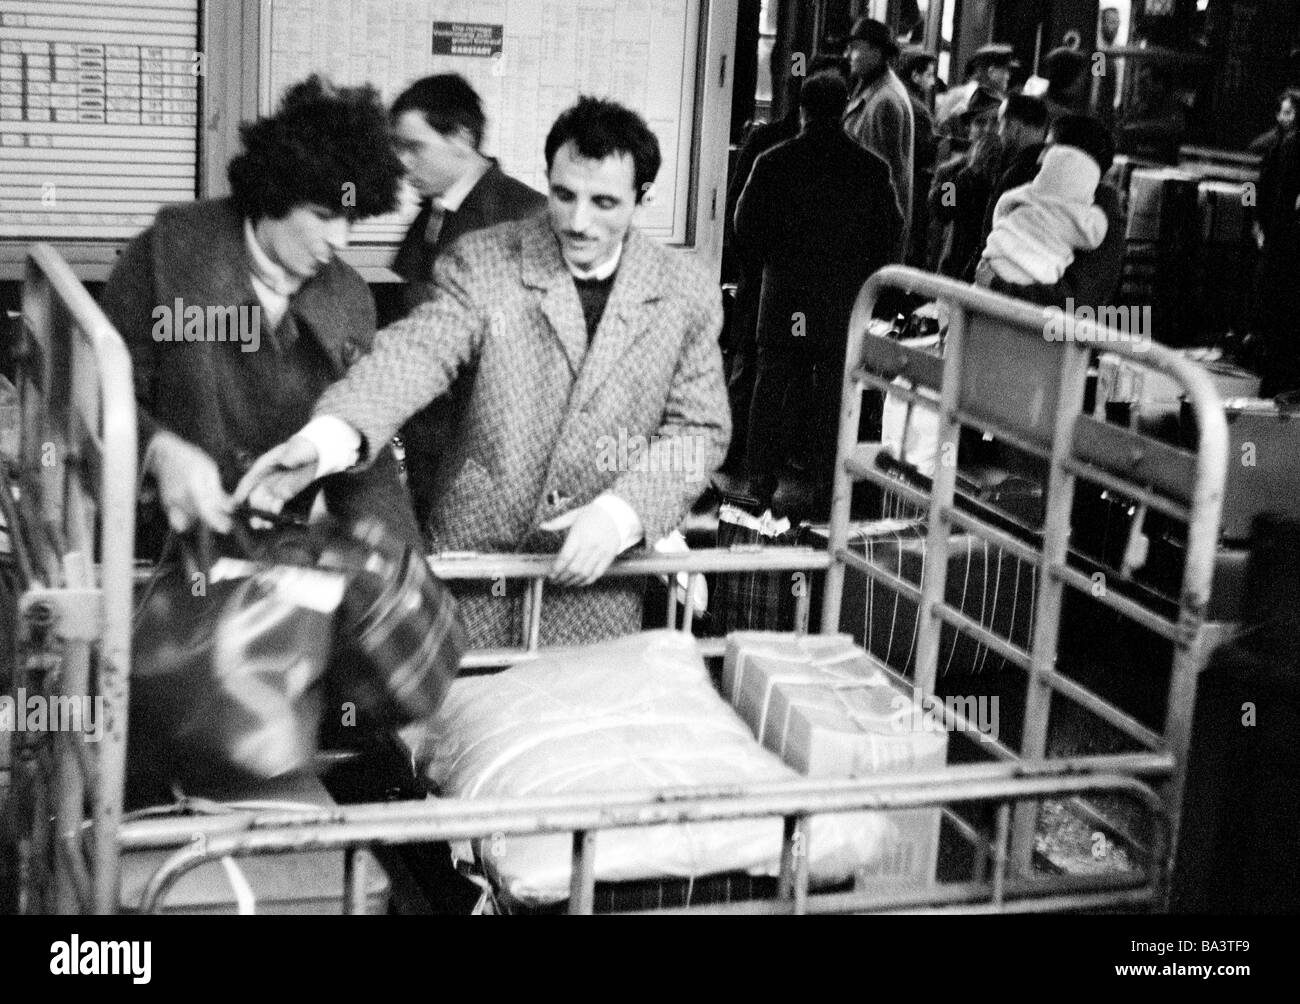 Sixties, black and white photo, people, business, guest-workers, an Italian guest-worker and his wife load a baggagecar in the central station of Dortmund for their homeward journey to Italy at Christmas, aged 30 to 40 years, D-Dortmund, Ruhr area, North Rhine-Westphalia Stock Photo